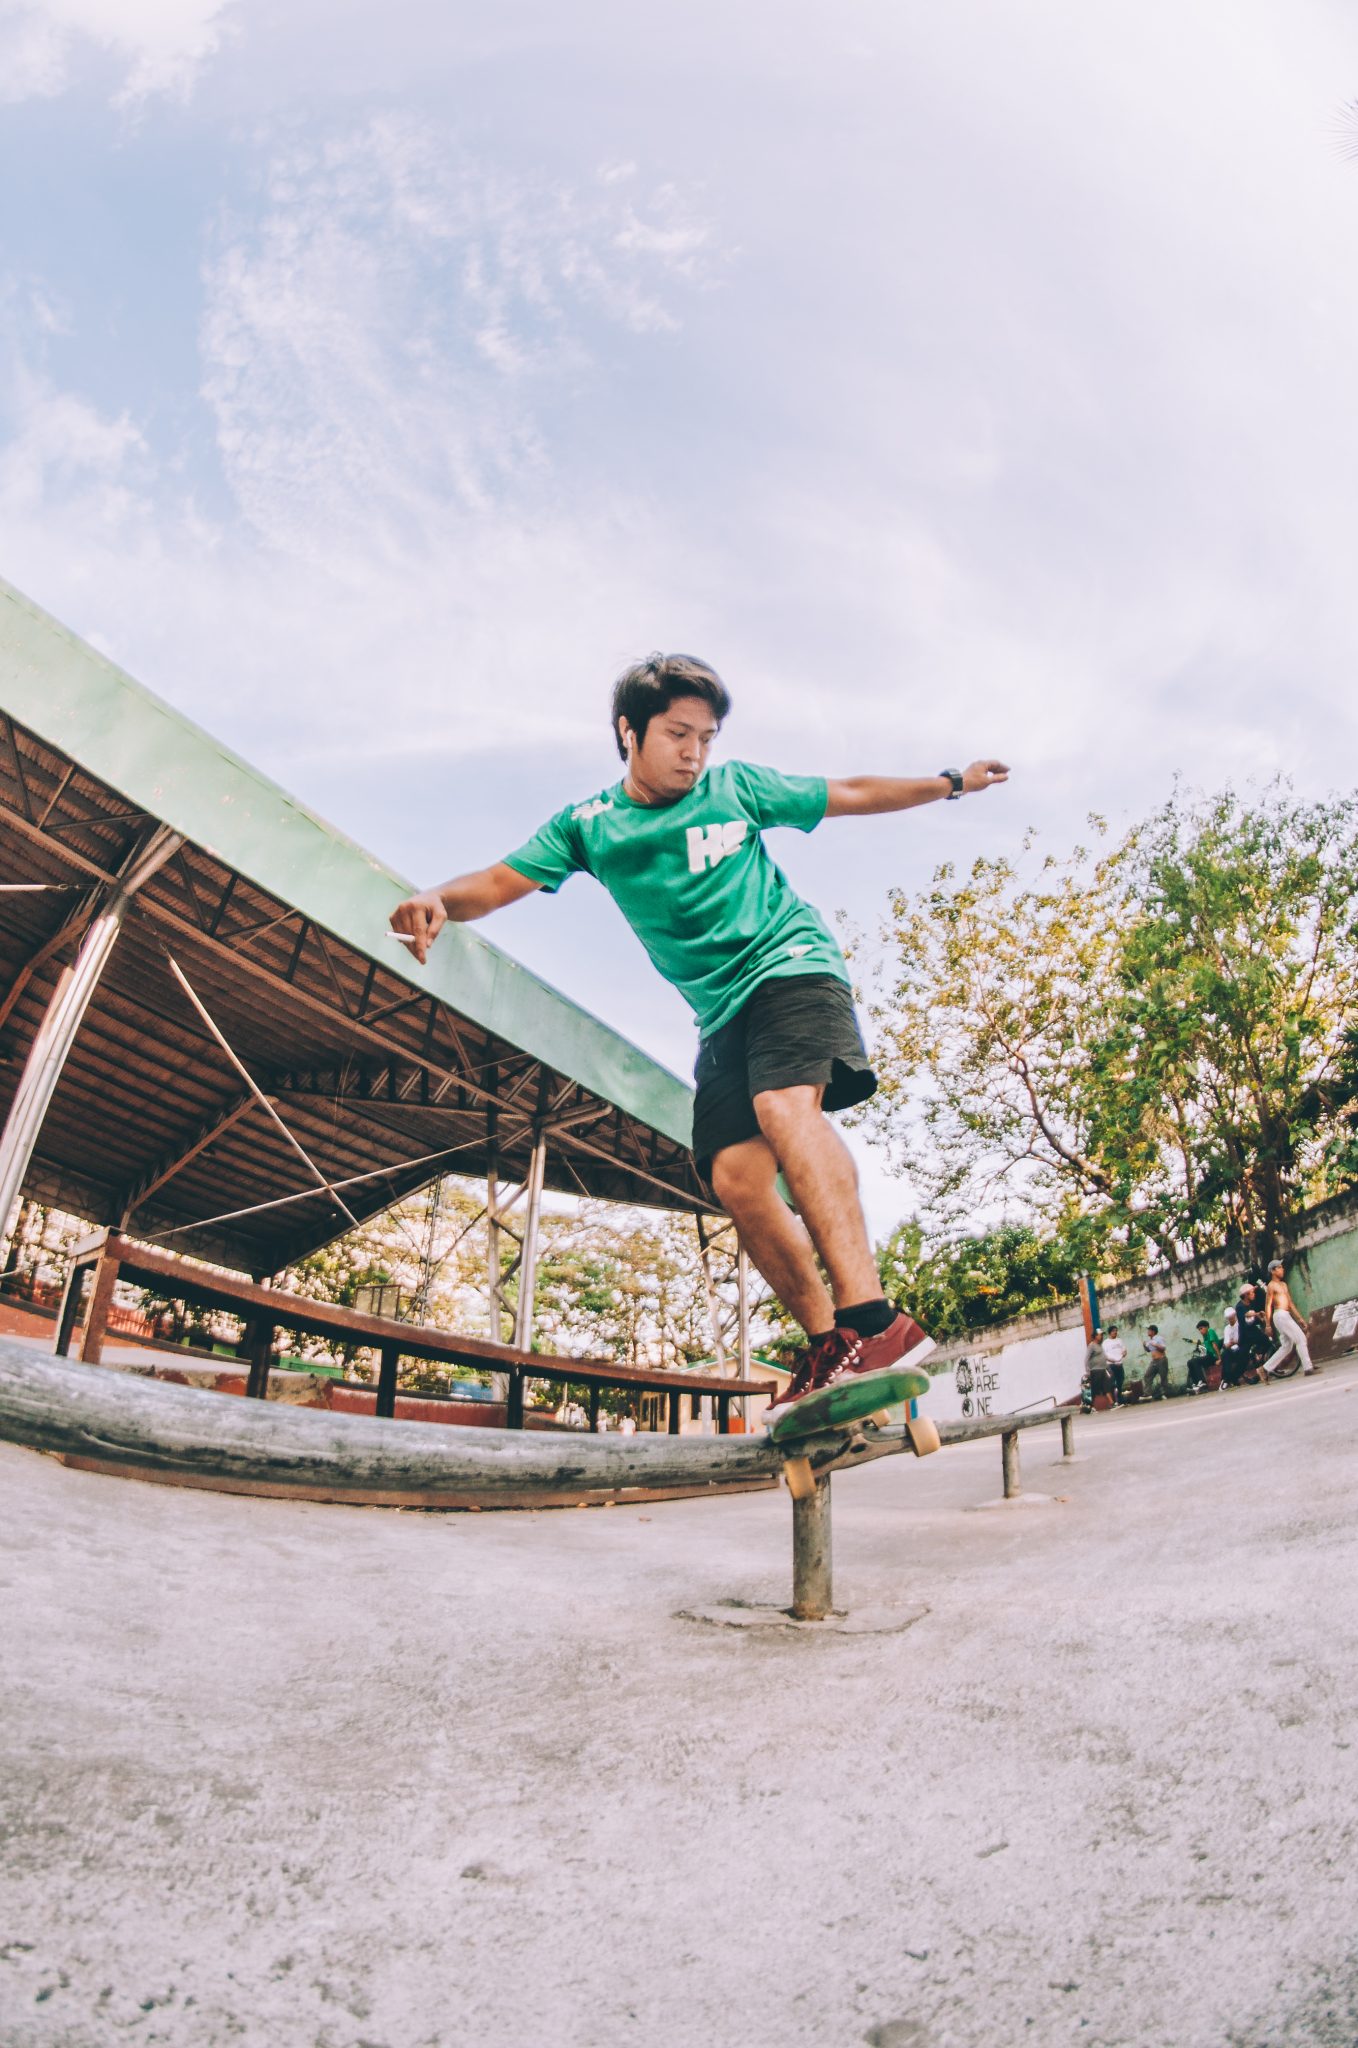 Go to Manila Skate Park if you're into rails, wall riding, and bowls